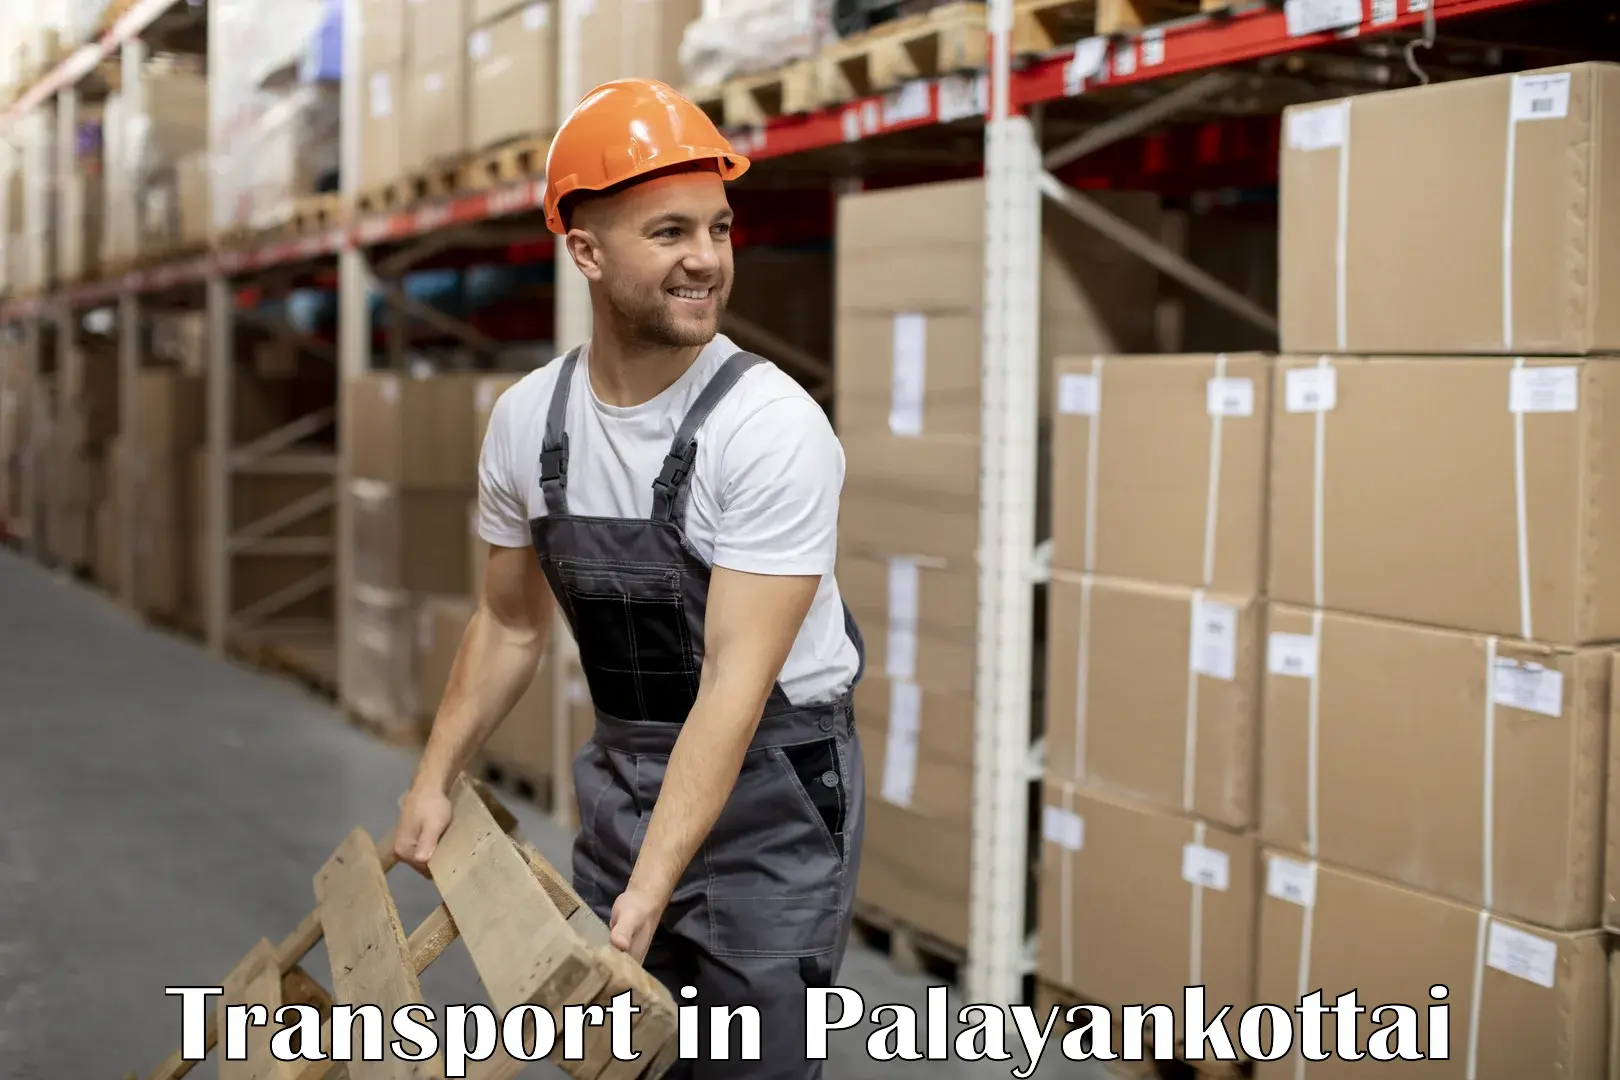 Transportation solution services in Palayankottai